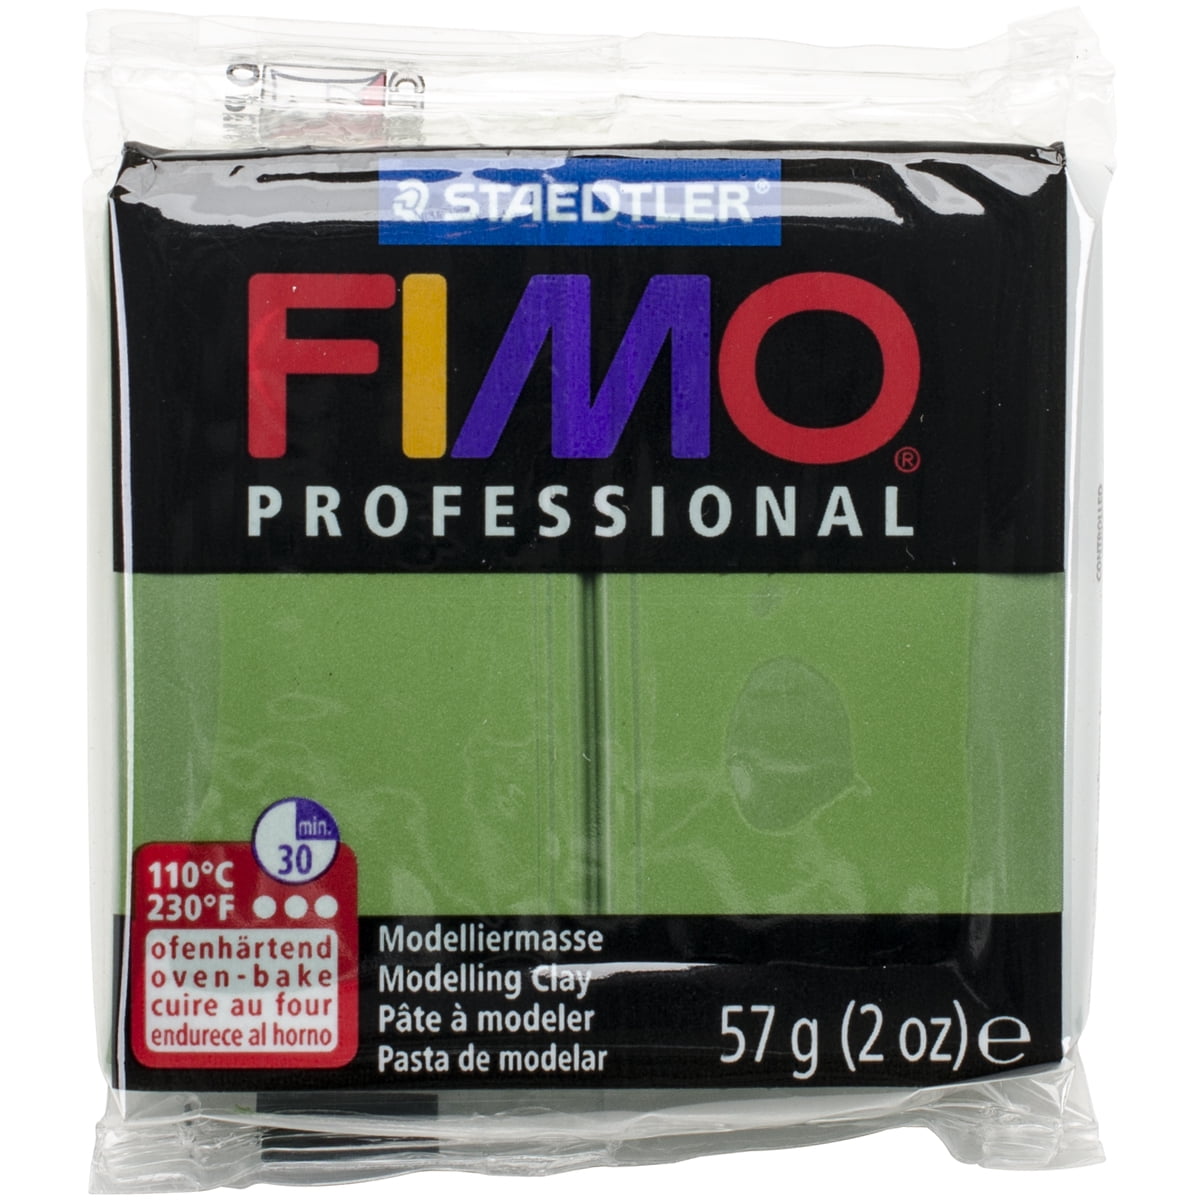 Buy 5 Get 2 Free FIMO Soft Polymer Oven Modelling Clay All 33 Colours 57g 